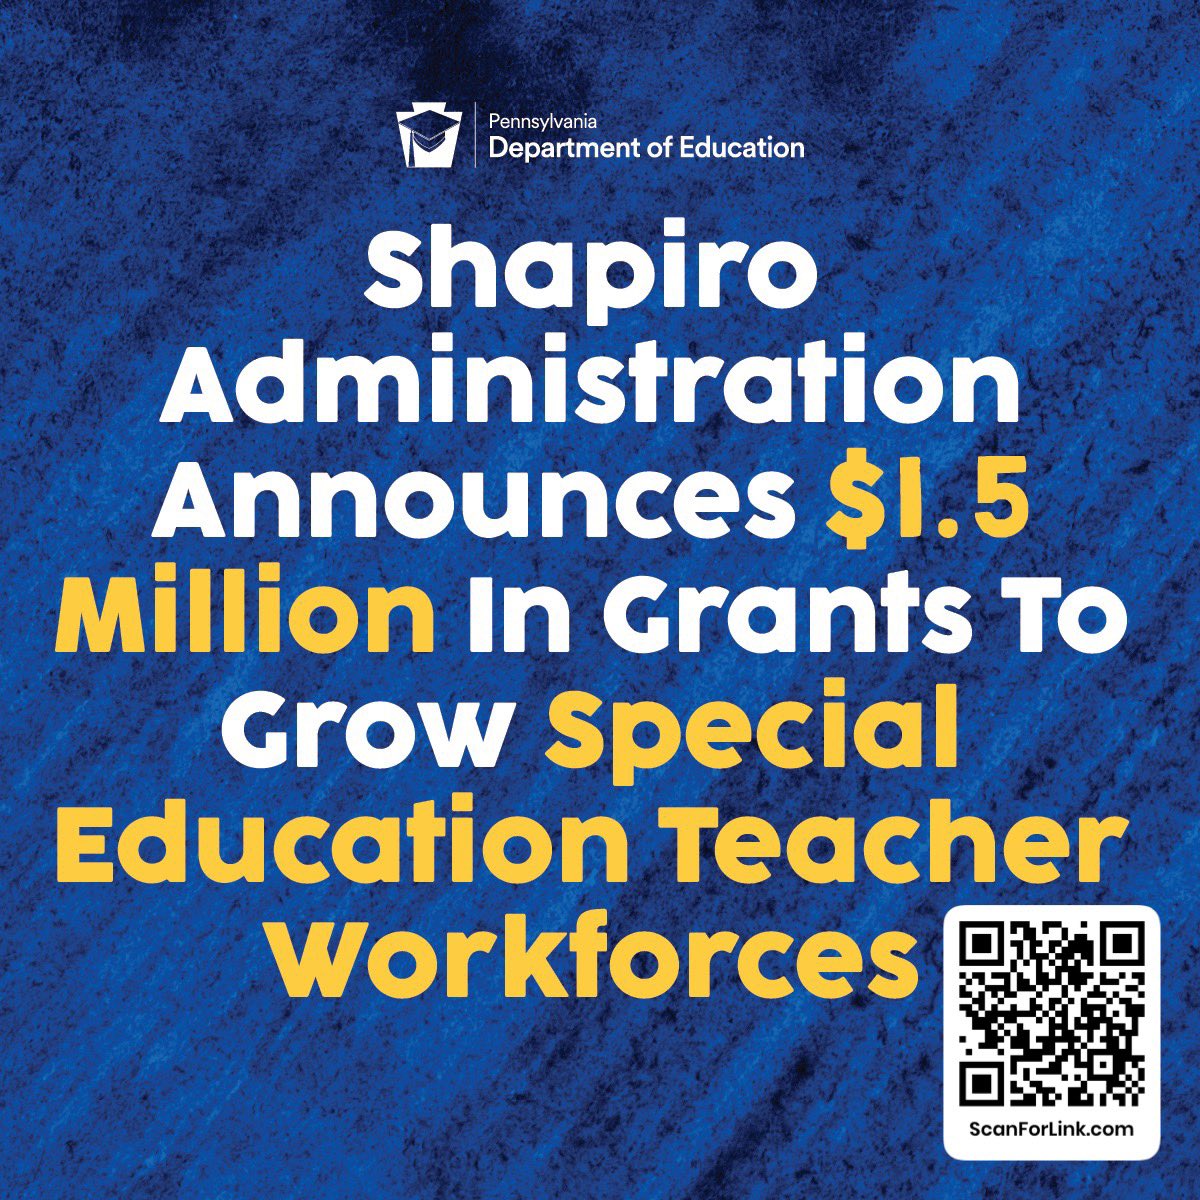 The Shapiro administration announced $1.5 million in grant funding to bolster the next generation of special educators. Funds available thru 6/30/26. Learn more by scanning the QR code or click here: tinyurl.com/5933nhjf